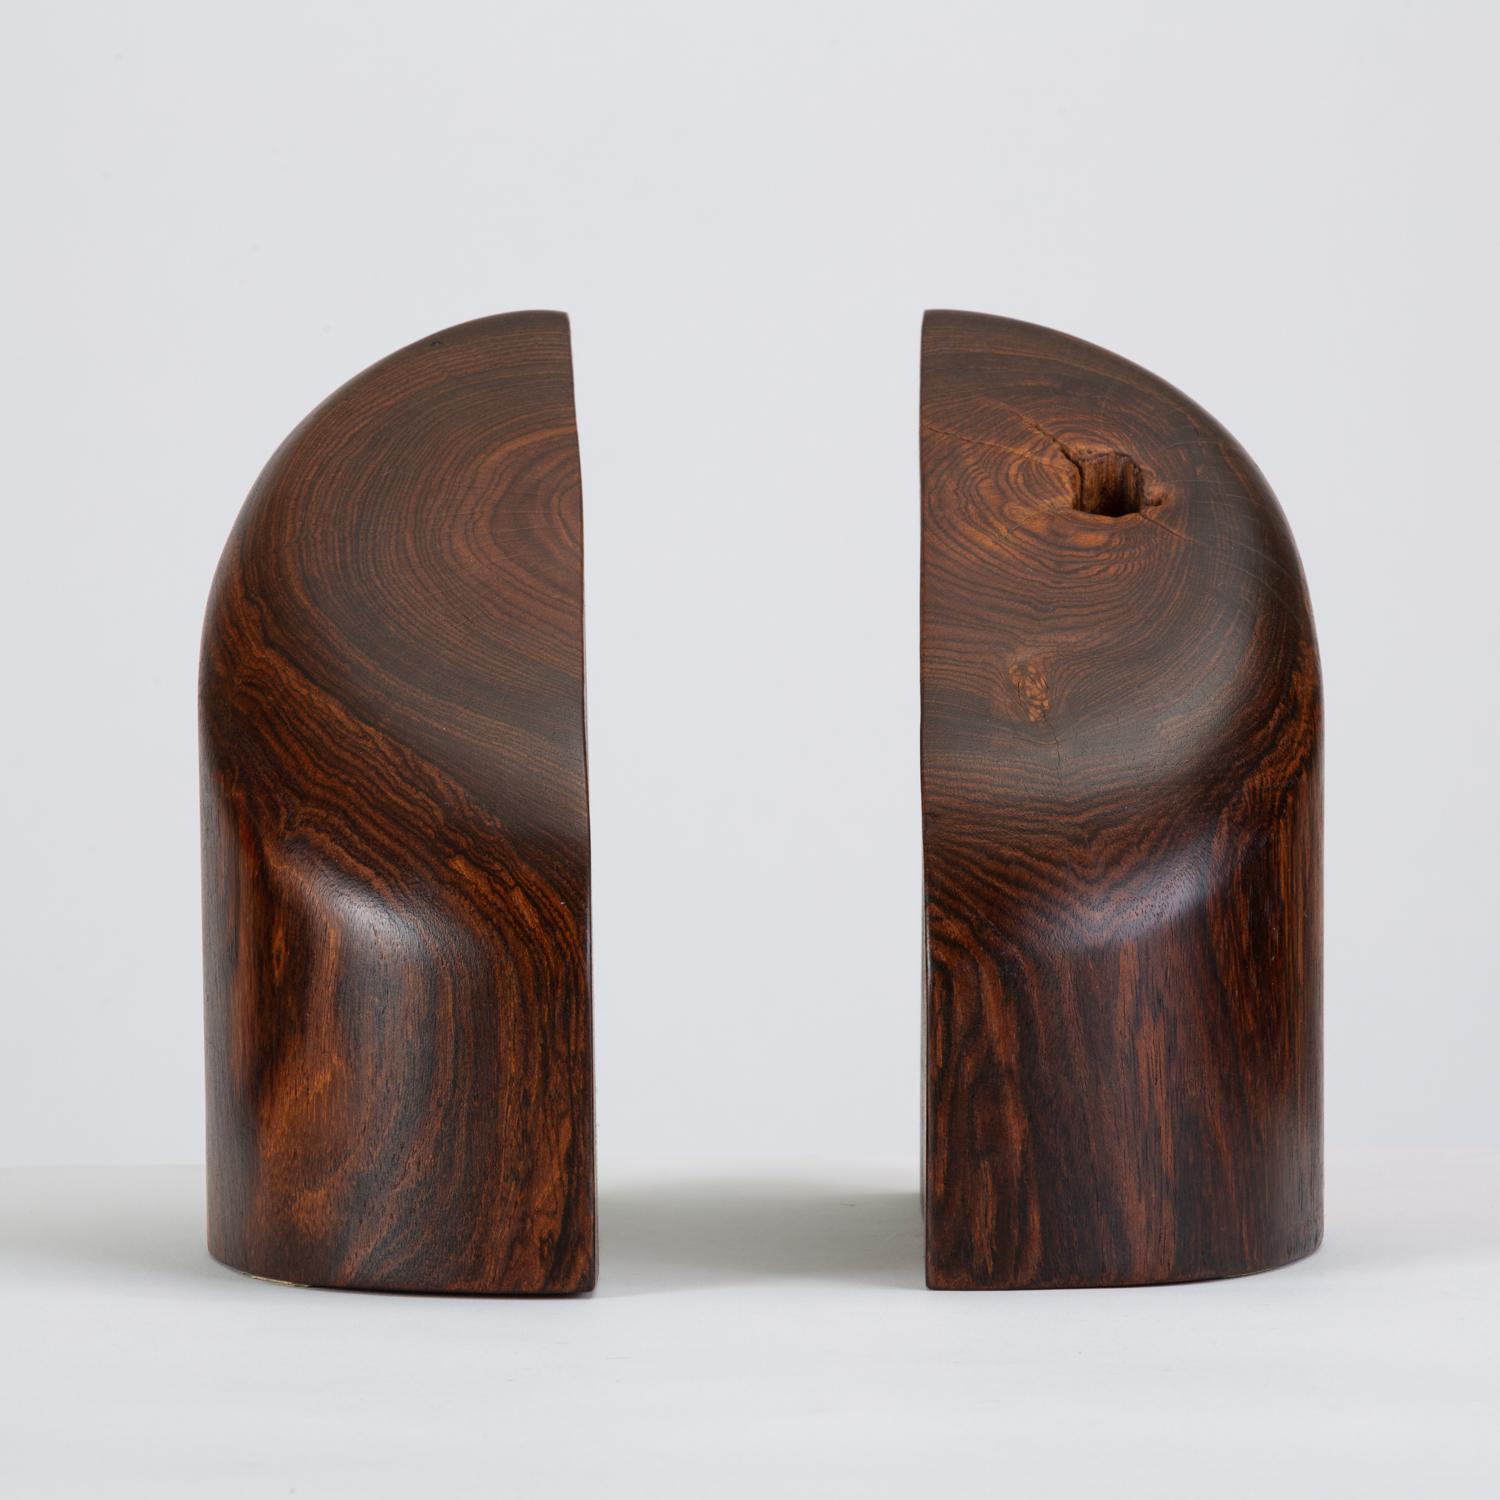 A pair of solid wood bookends by Mexican-American designer Don Shoemaker for his company, Señal. Rendered in highly figured cocobolo wood, a species of local tropical wood similar to rosewood, the bookends showcase a dynamic grain pattern and the